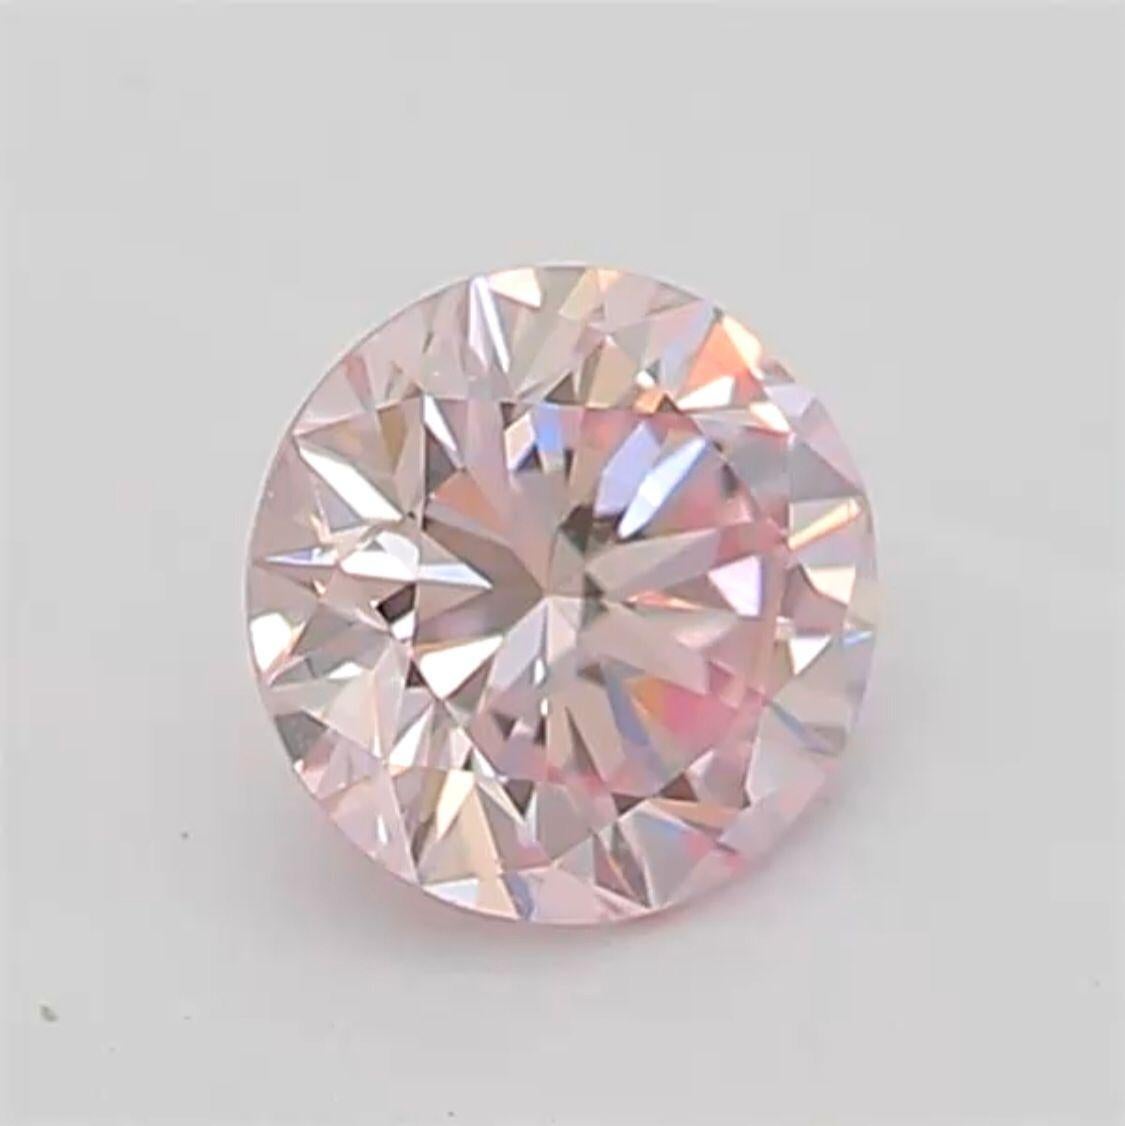 Round Cut 0.20 Carat Very Light Pink Round Shaped Diamond VS1 Clarity CGL Certified For Sale